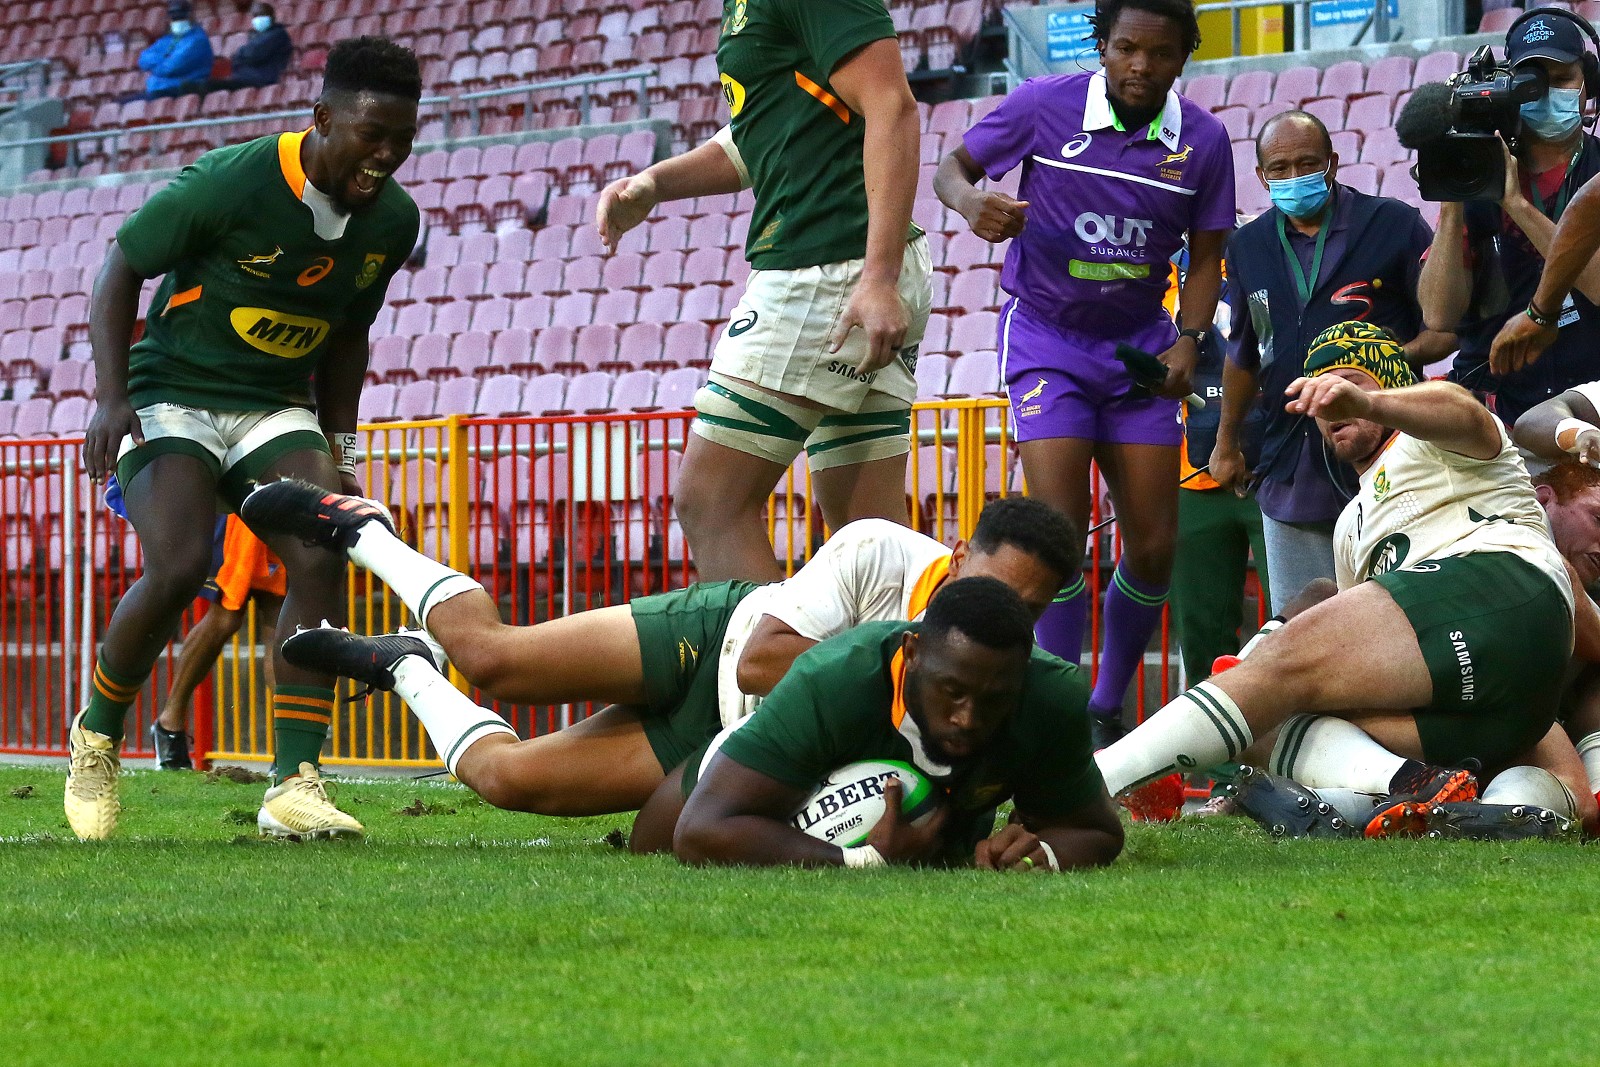 Siya Kolisi scores from a great maul by the Green pack.